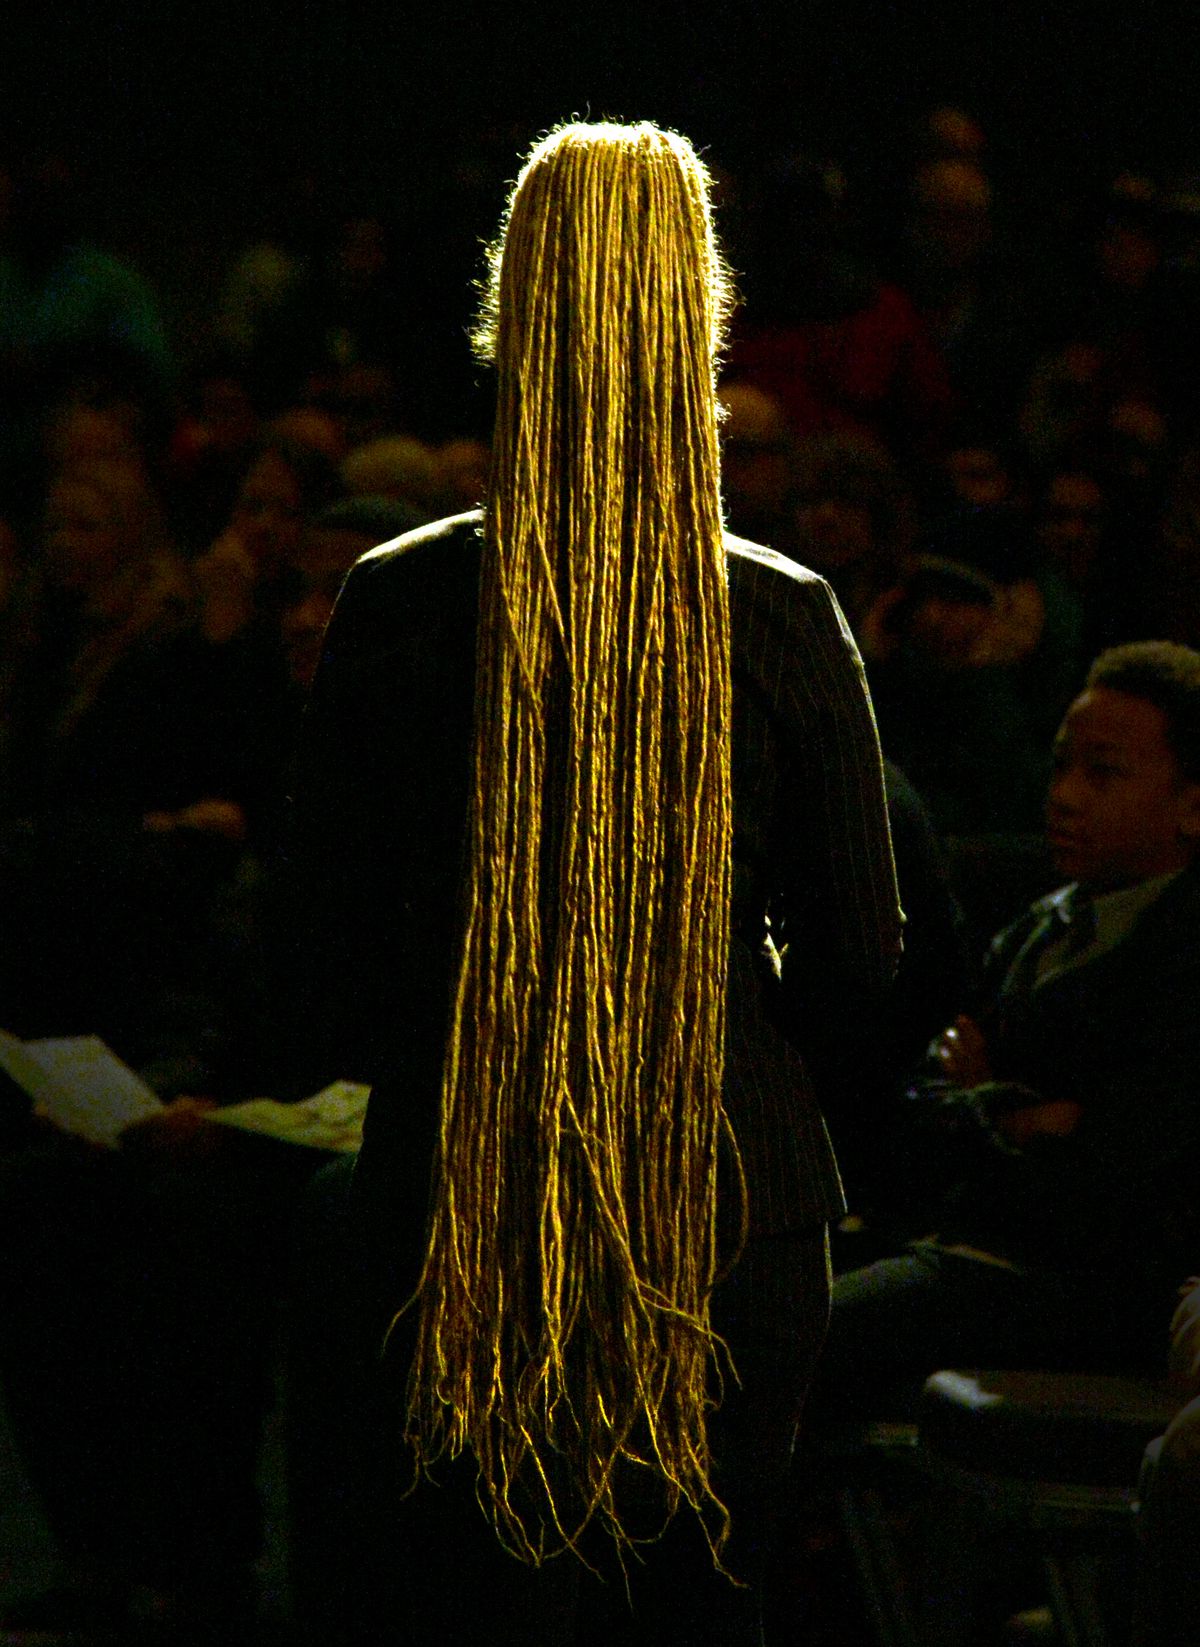 Wearing dreadlock weave hair extensions, Rachel Dolezal, president of the NAACP’s Spokane chapter, leaves the podium after speaking at a Dr. Martin Luther King Jr. rally at the Spokane Convention Center on Jan. 19. (Colin Mulvany)